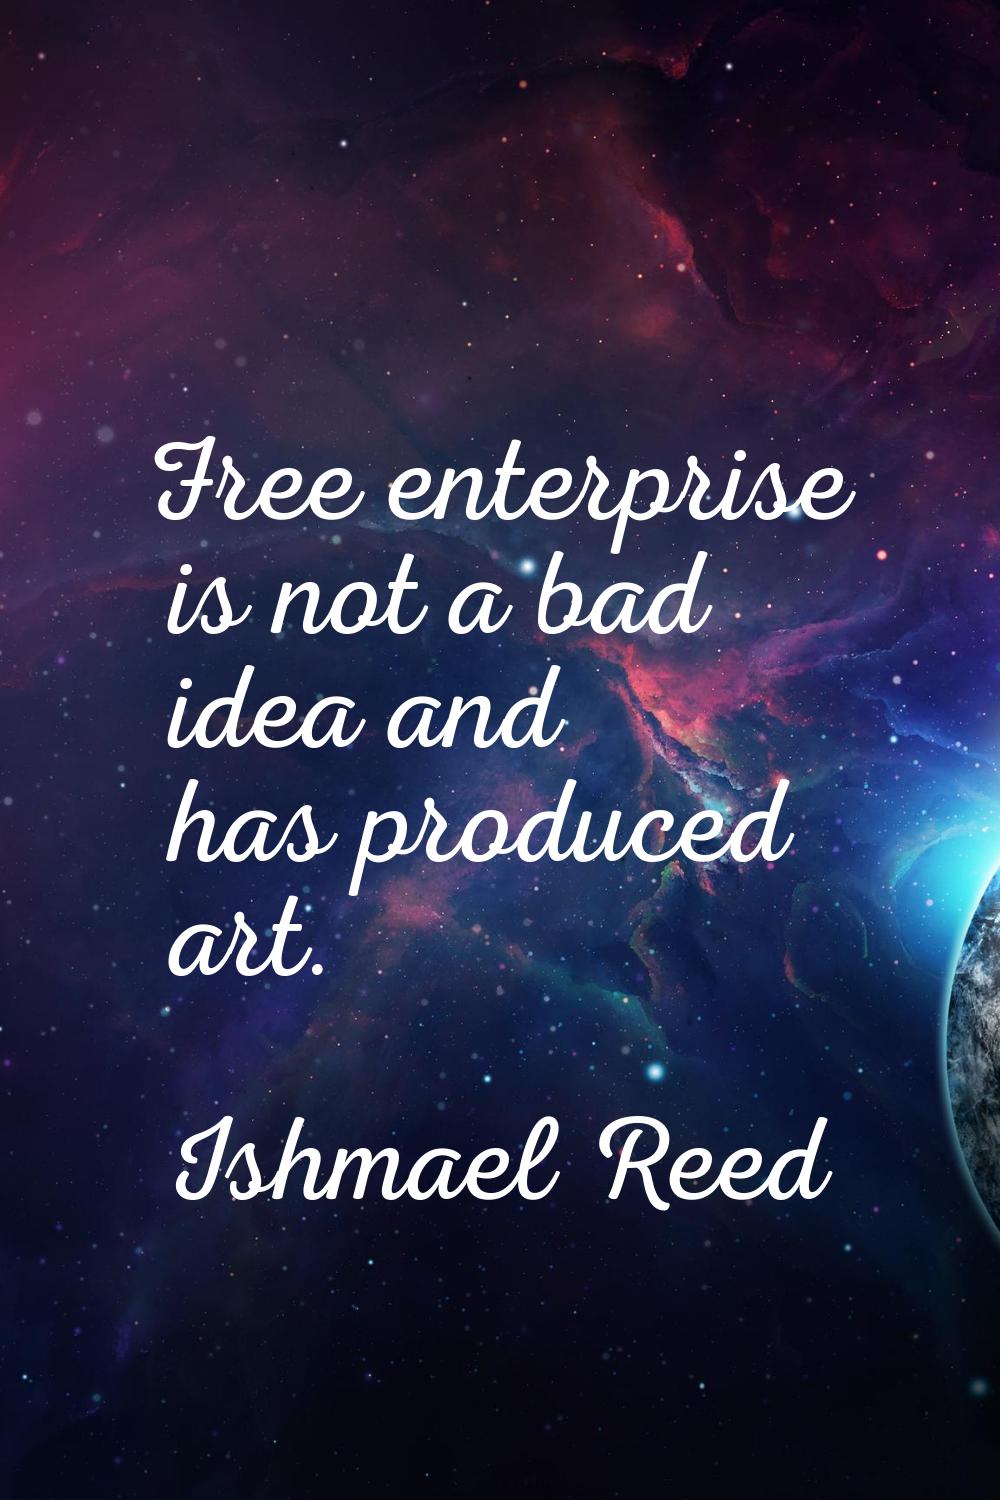 Free enterprise is not a bad idea and has produced art.